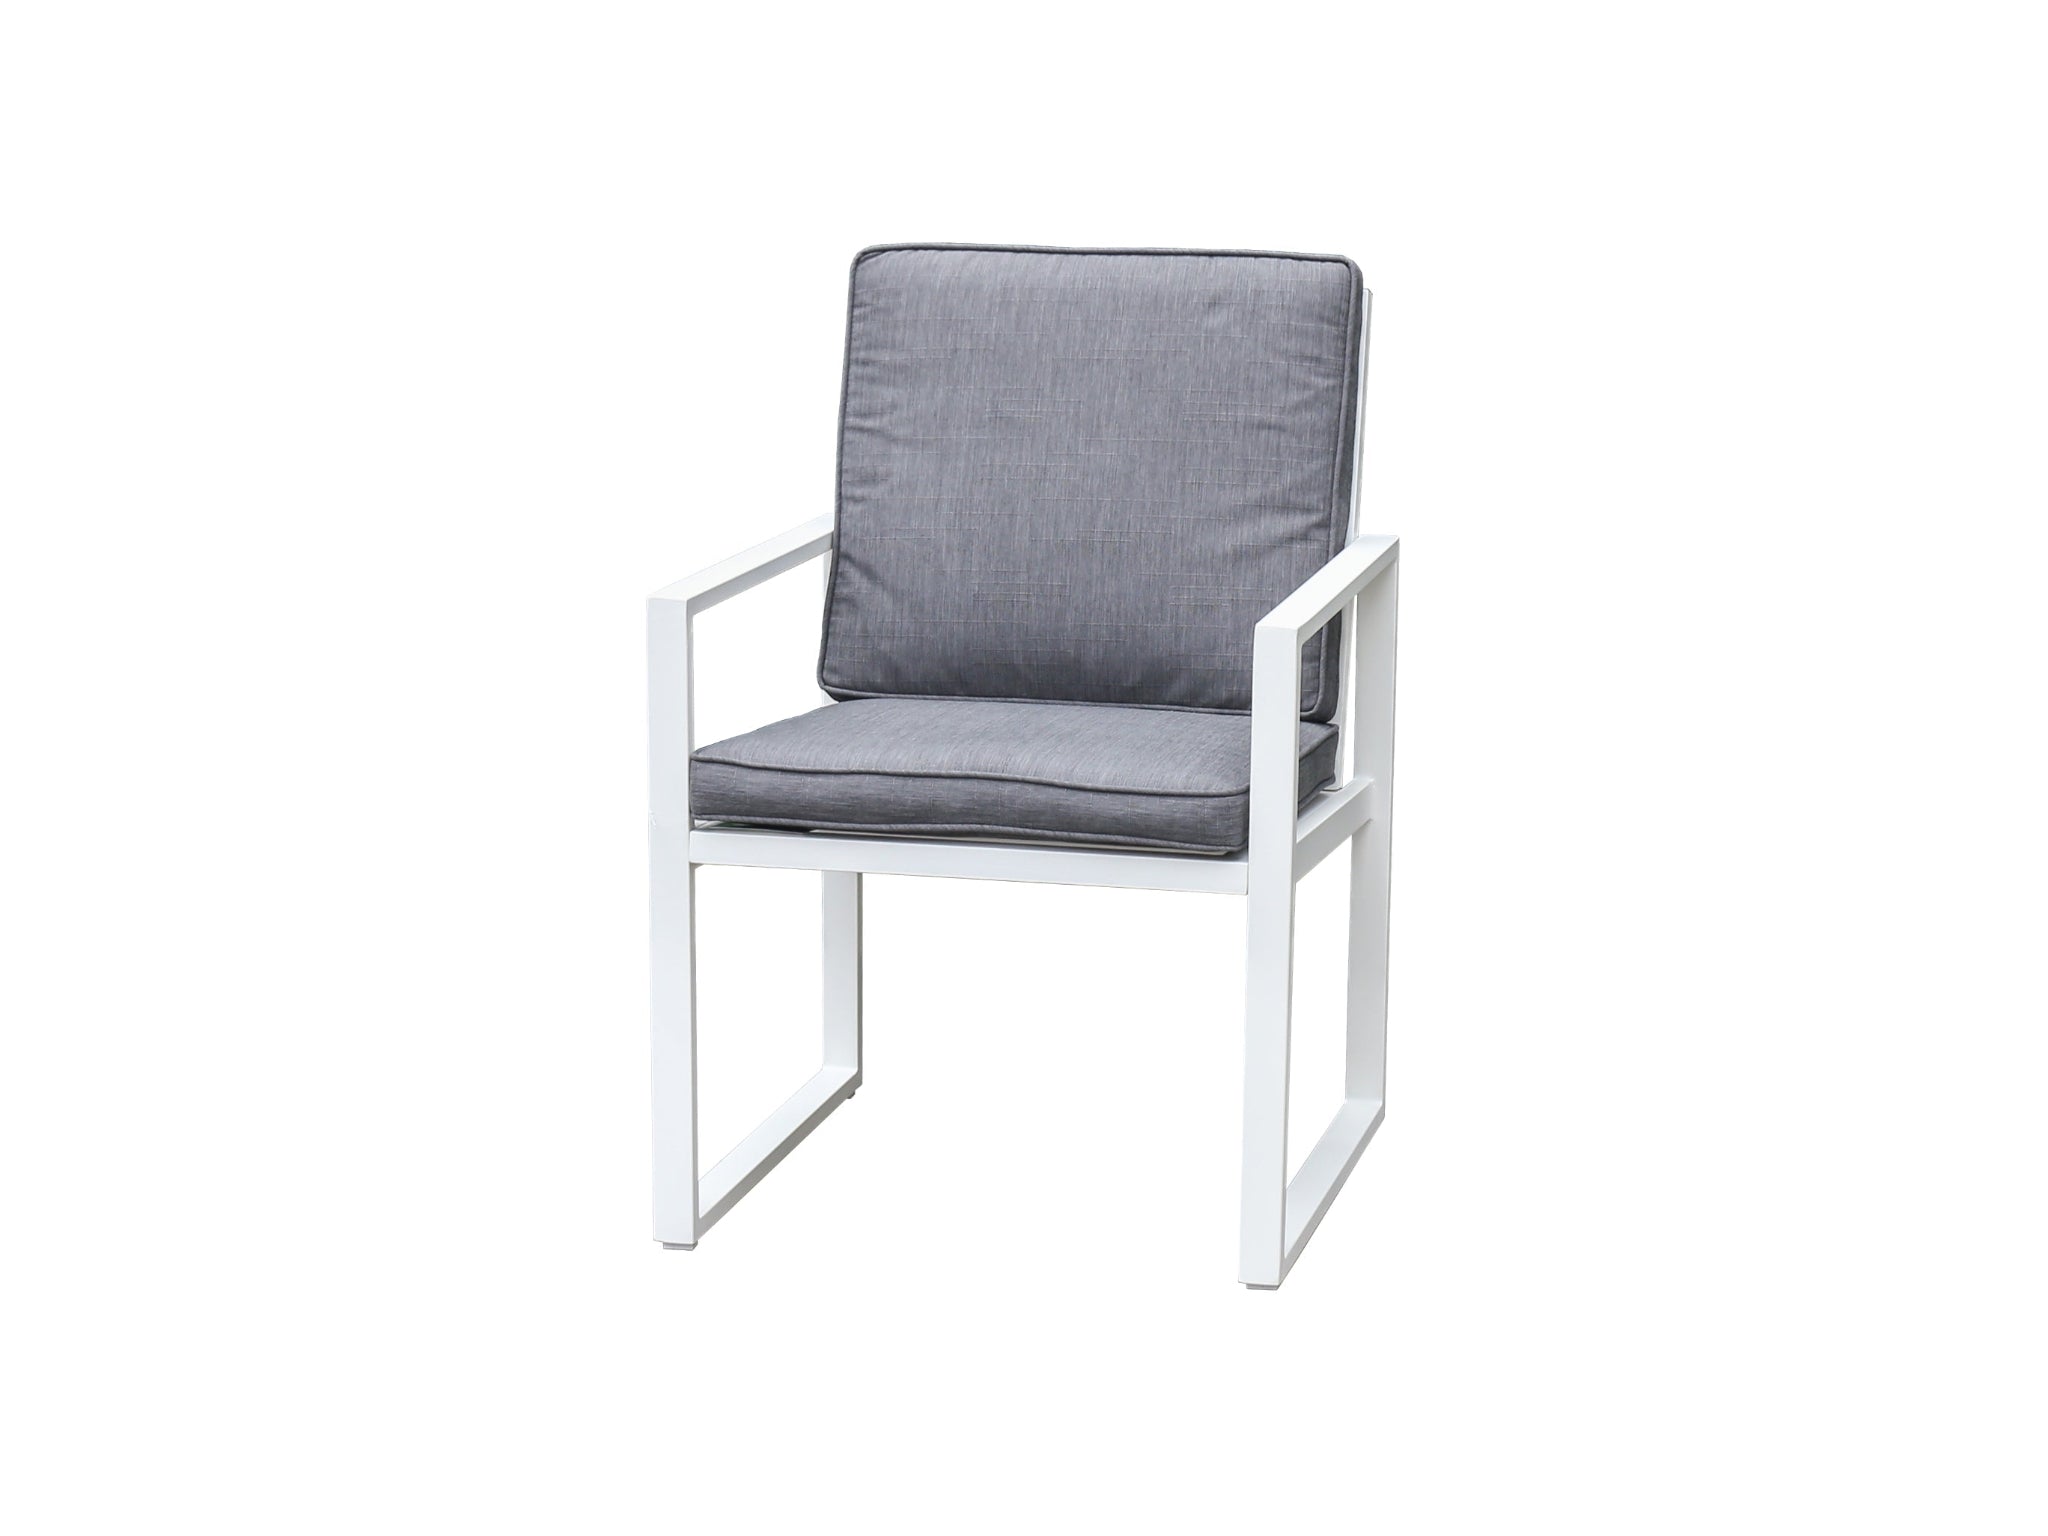 Sunlongarden Manly Dining Chair